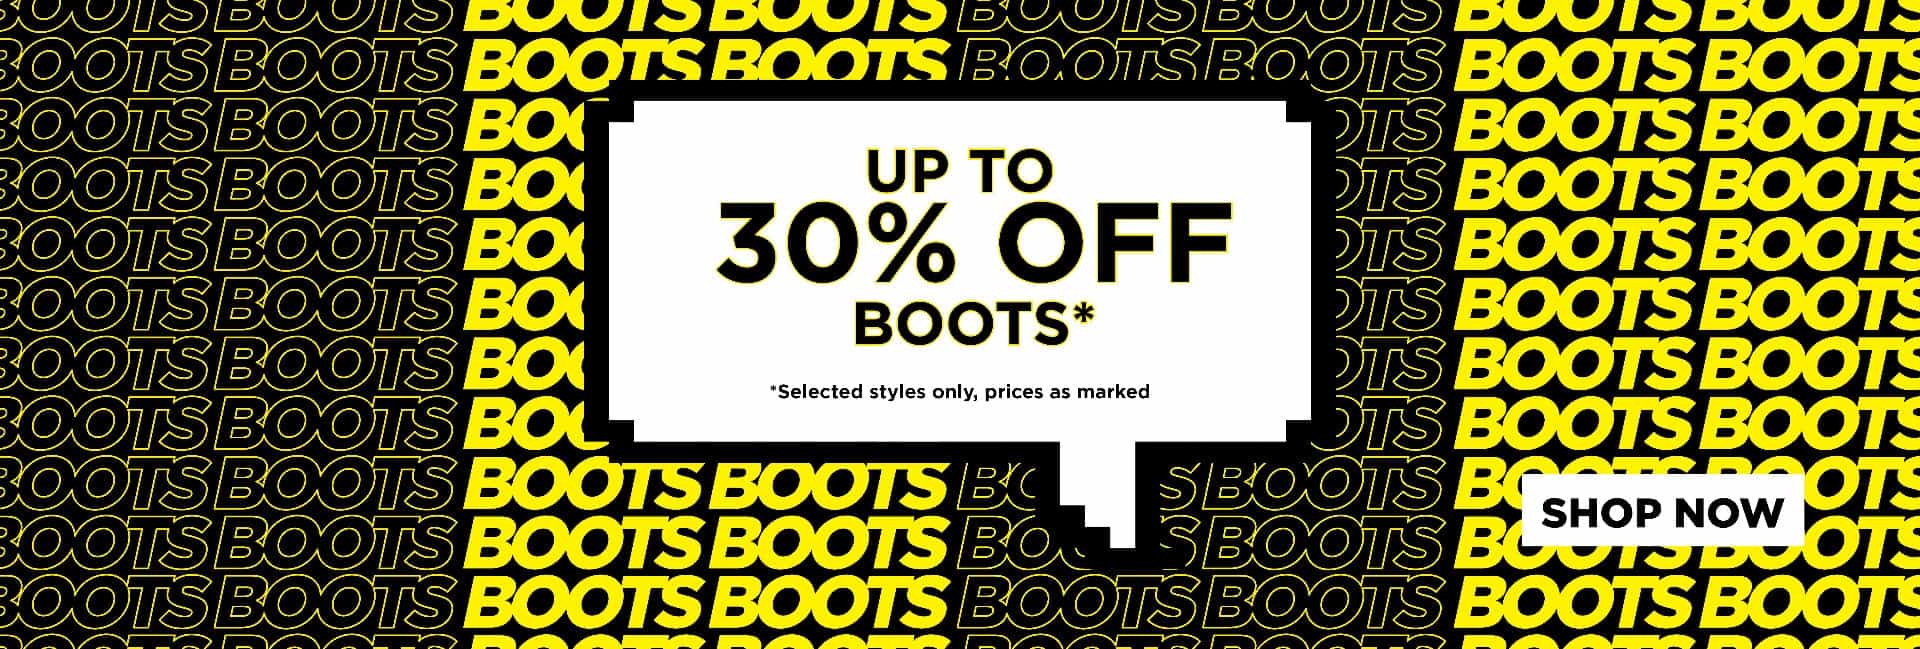 Up to 30% OFF on boots